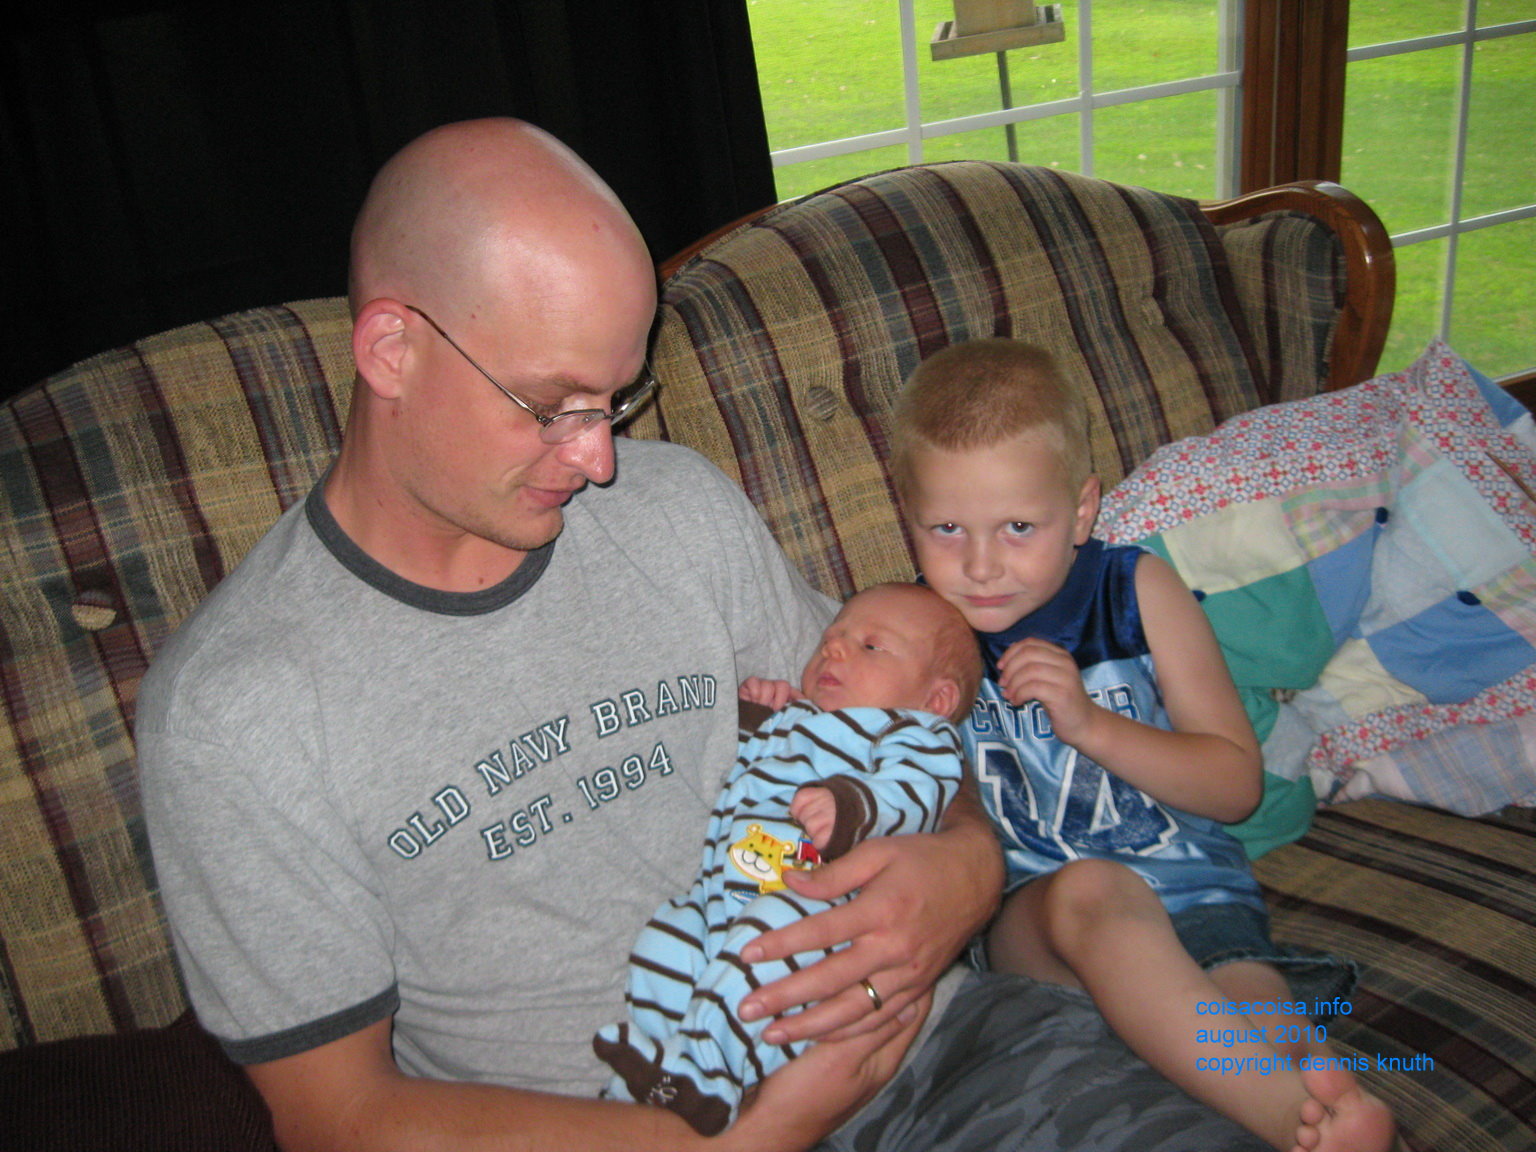 Jared looks suspicious with his dad holding new cousin Colin